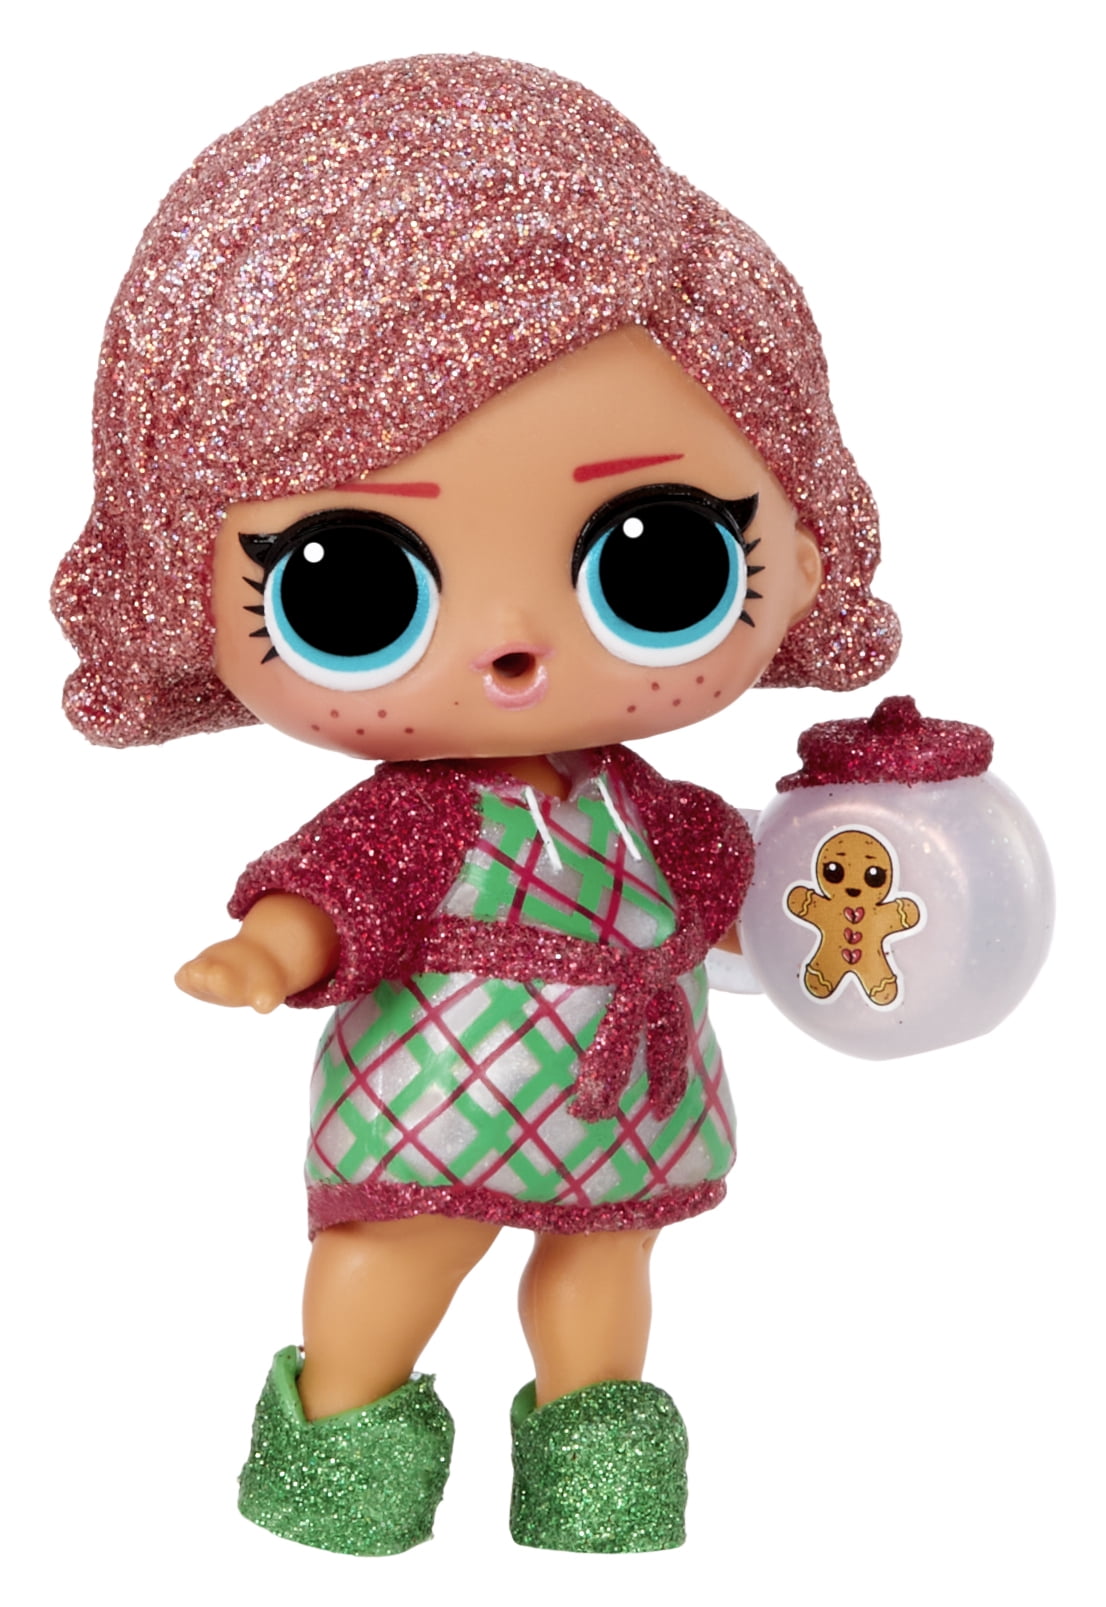 L.O.L Surprise! L.O.L. Surprise! Holiday Present Surprise doll Dreamin’ B.B. with 7 surprises, collectible dolls, limited edition, holiday theme- great gift for girls age 4+